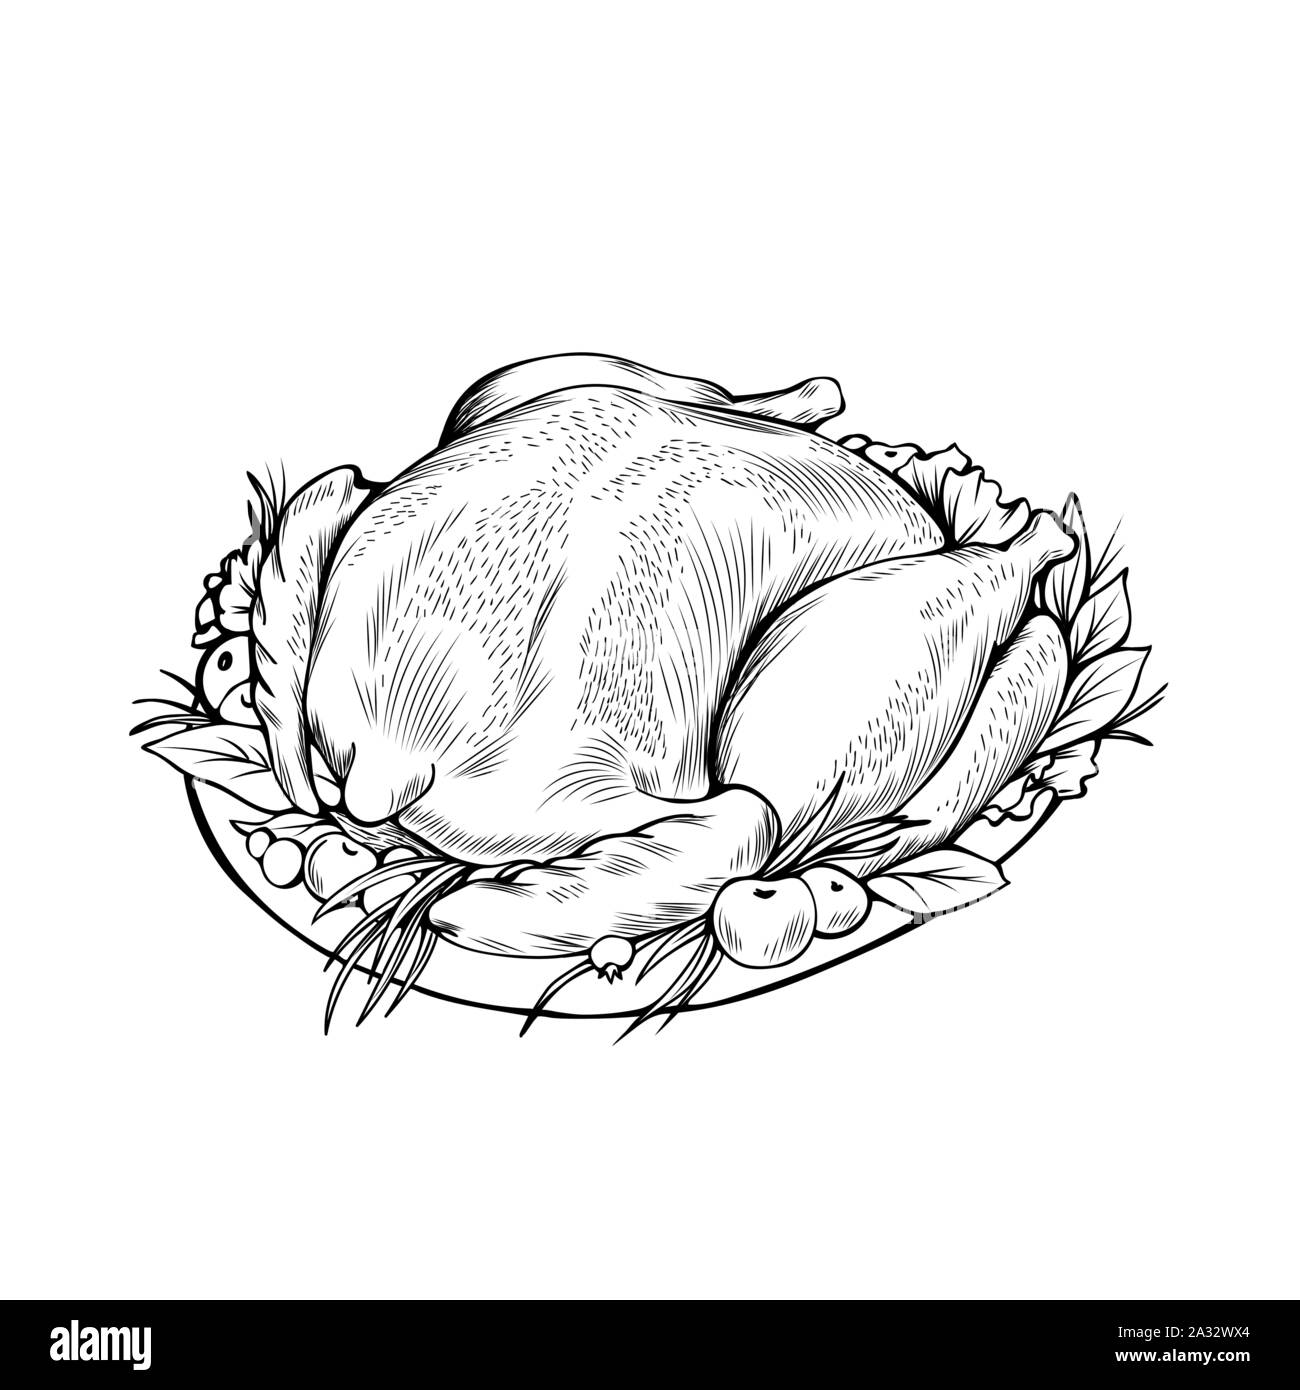 Roasted Chicken Drawing Images  Free Download on Freepik